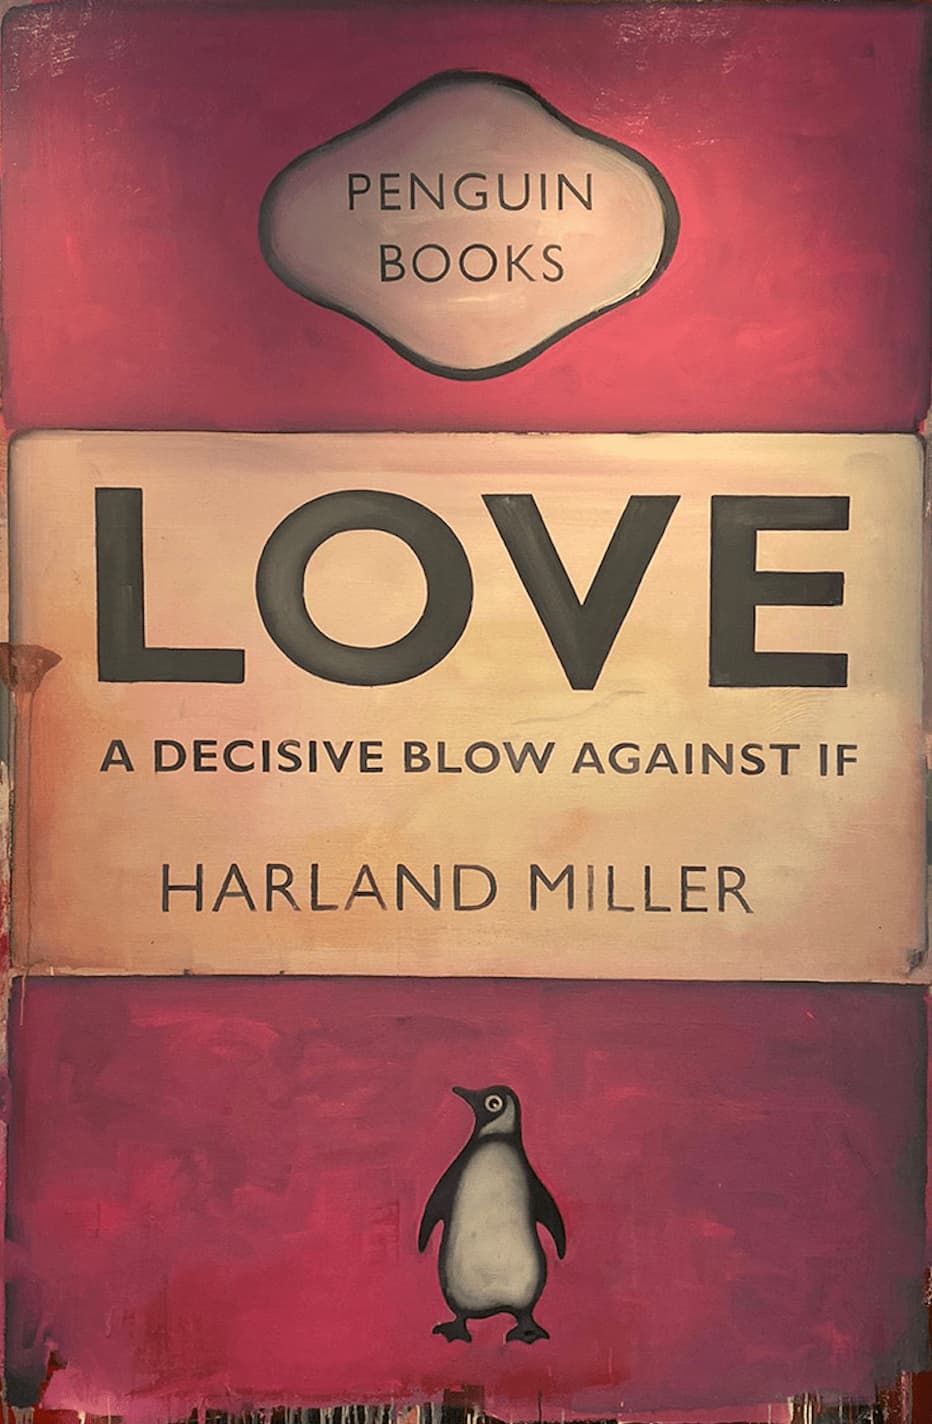 Harland Miller, Love a Decisive Blow Against If, 2013